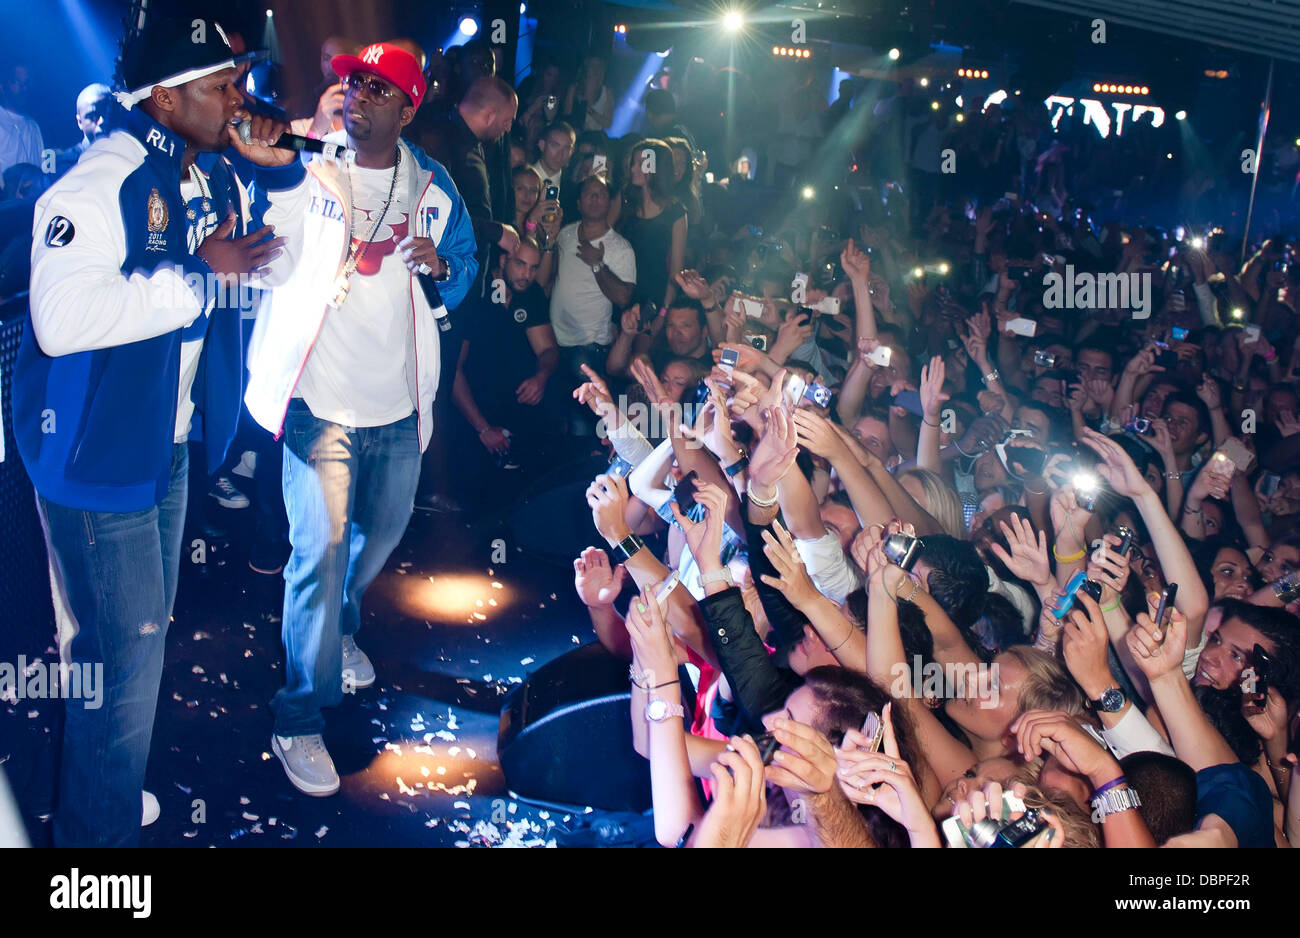 50 Cent, real name Curtis Jackson, performs at Palais Club Cannes Cannes, France - 16.08.11 Stock Photo